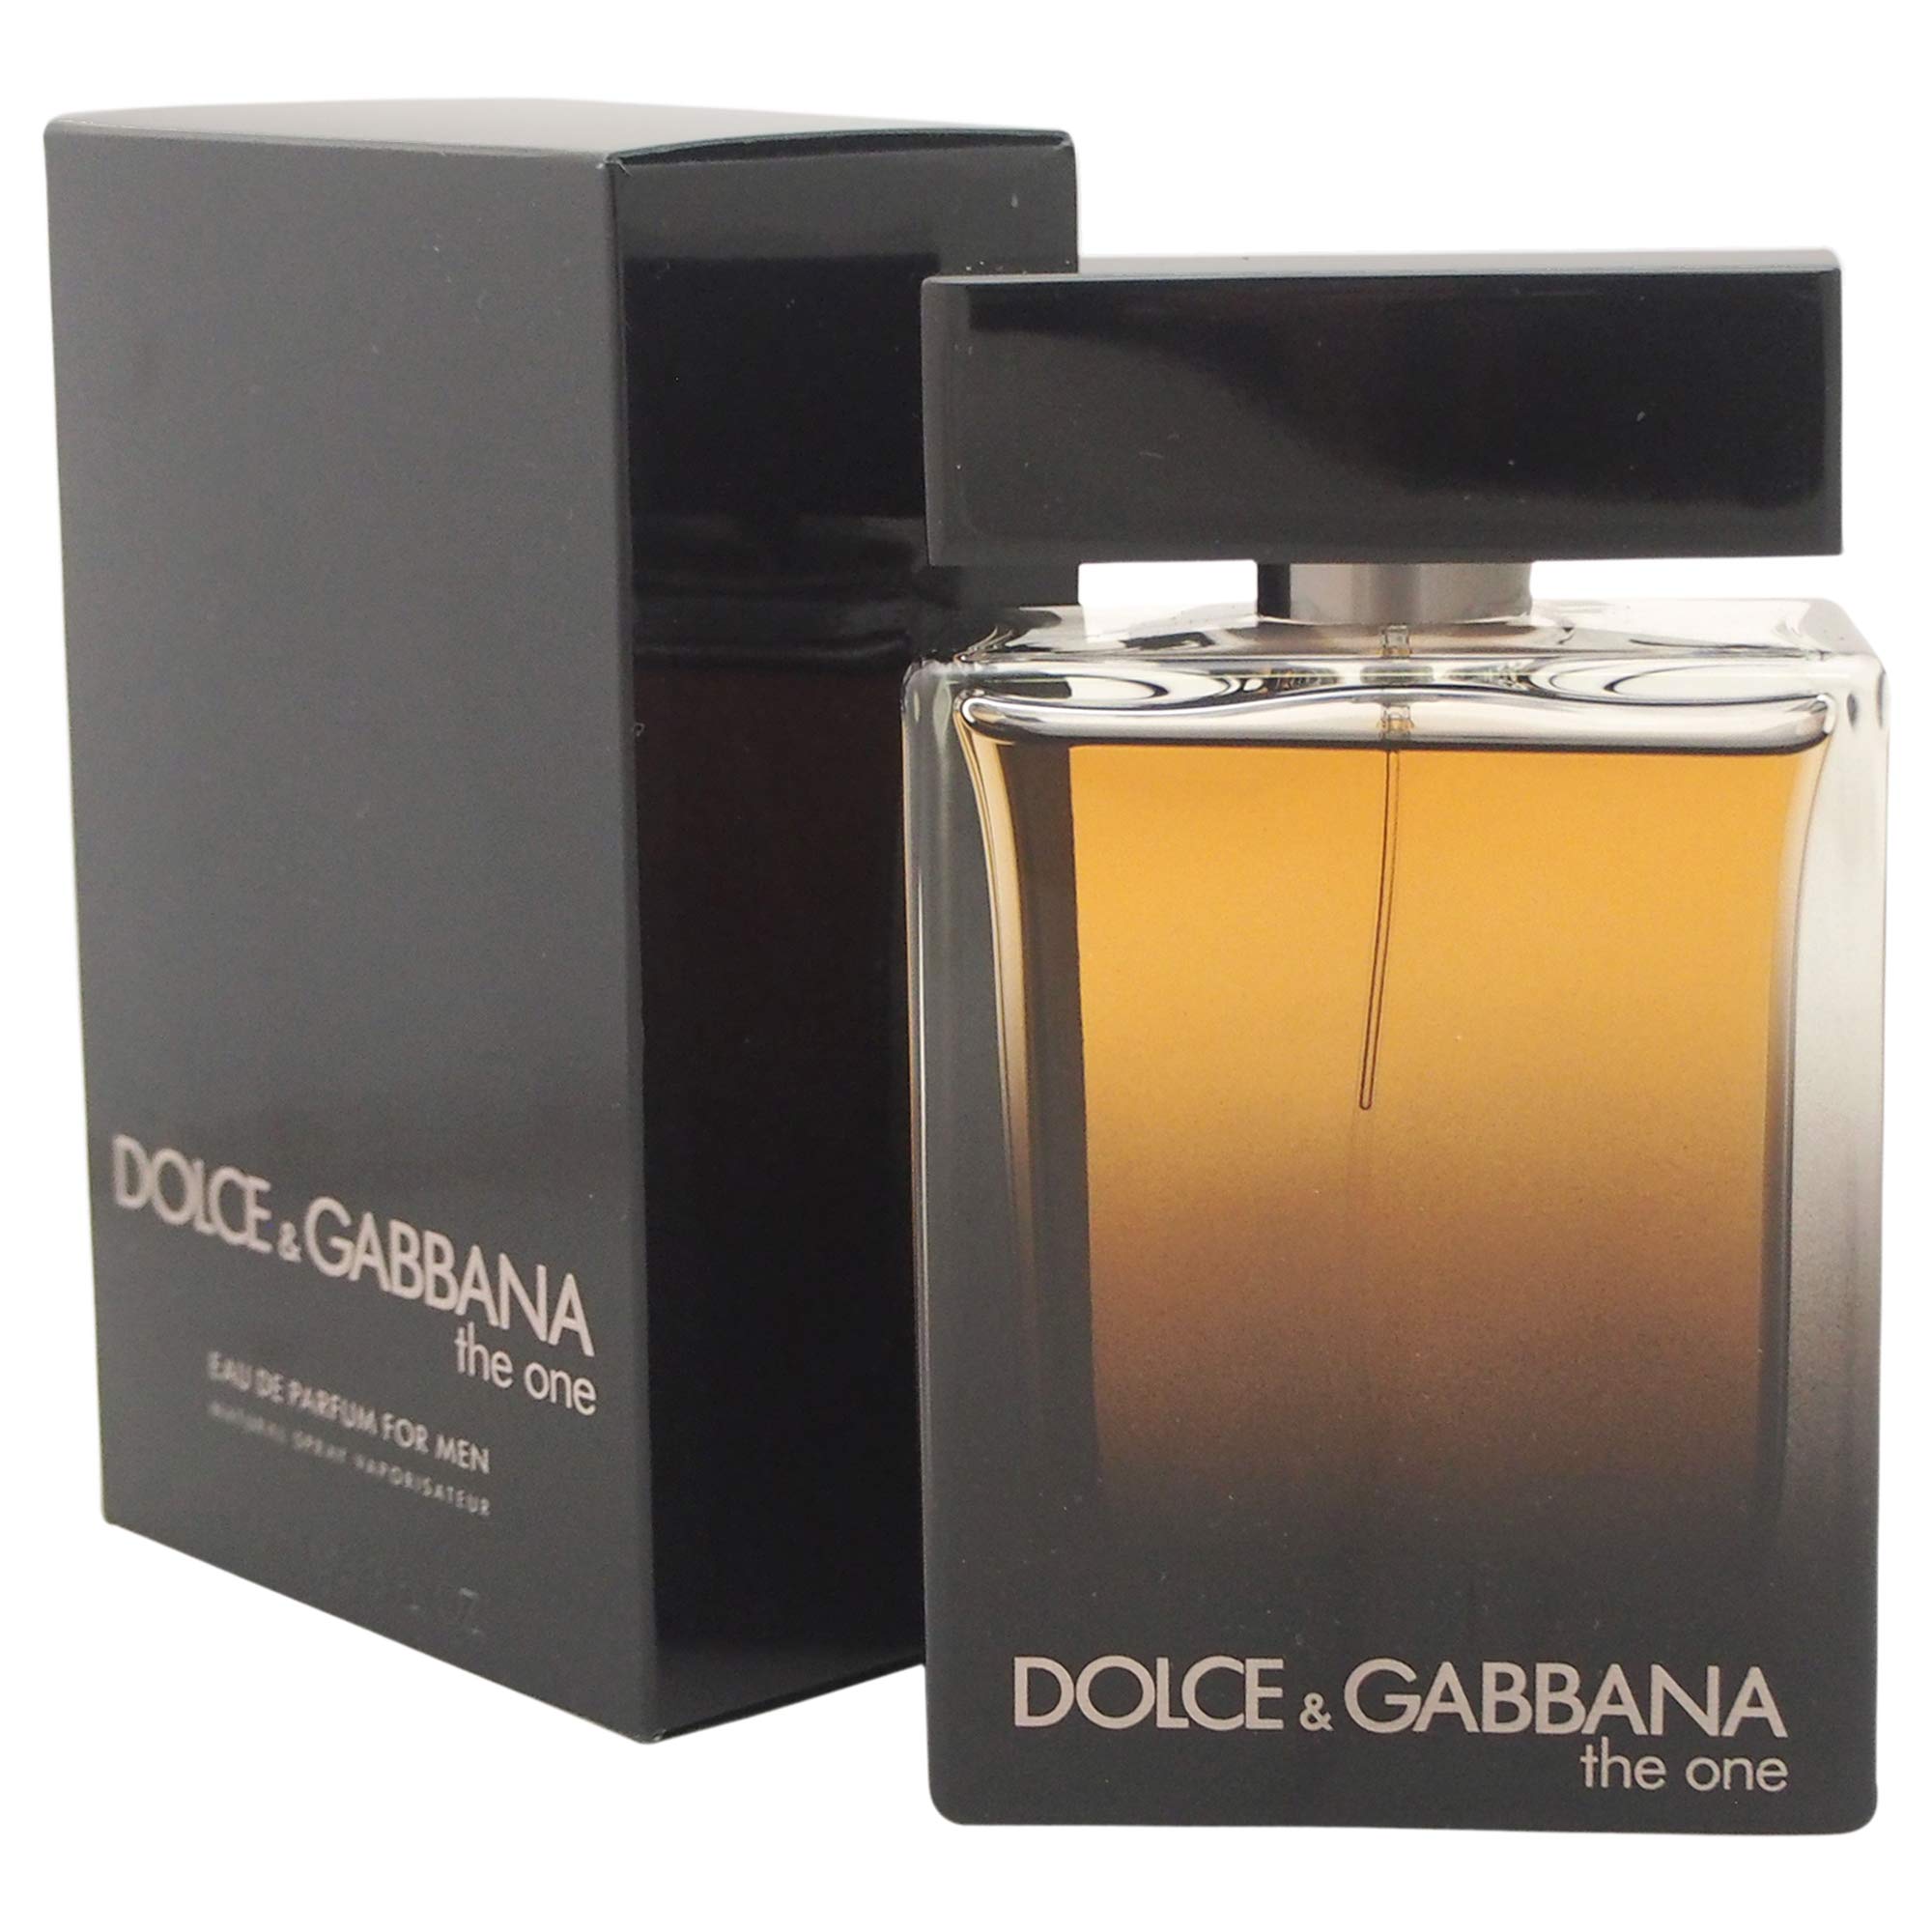 The One by Dolce & Gabbana | Eau de Parfum Natural Spray | Fragrance for Men | Elegant and Sensual Scents of Amber and Tobacco | 100 mL / 3.3 oz